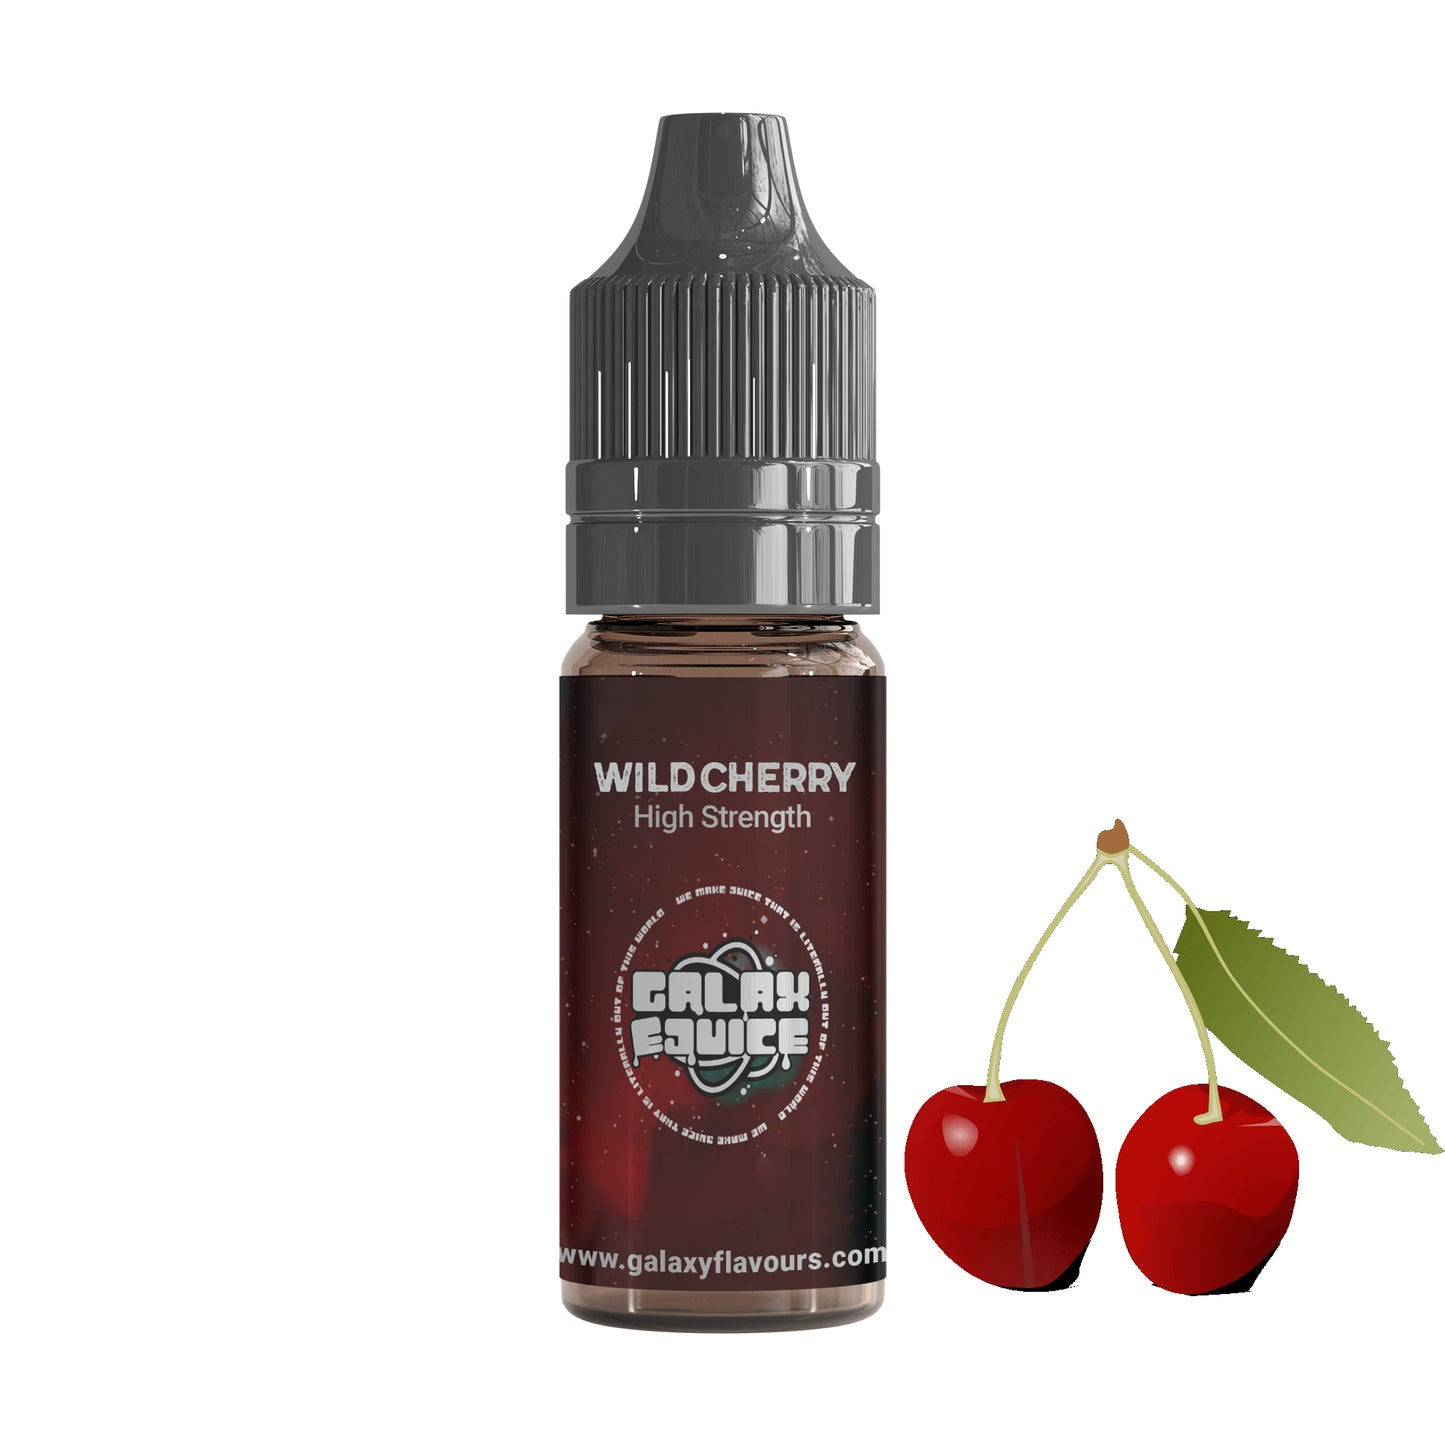 Wild Cherry High Strength Professional Flavouring.